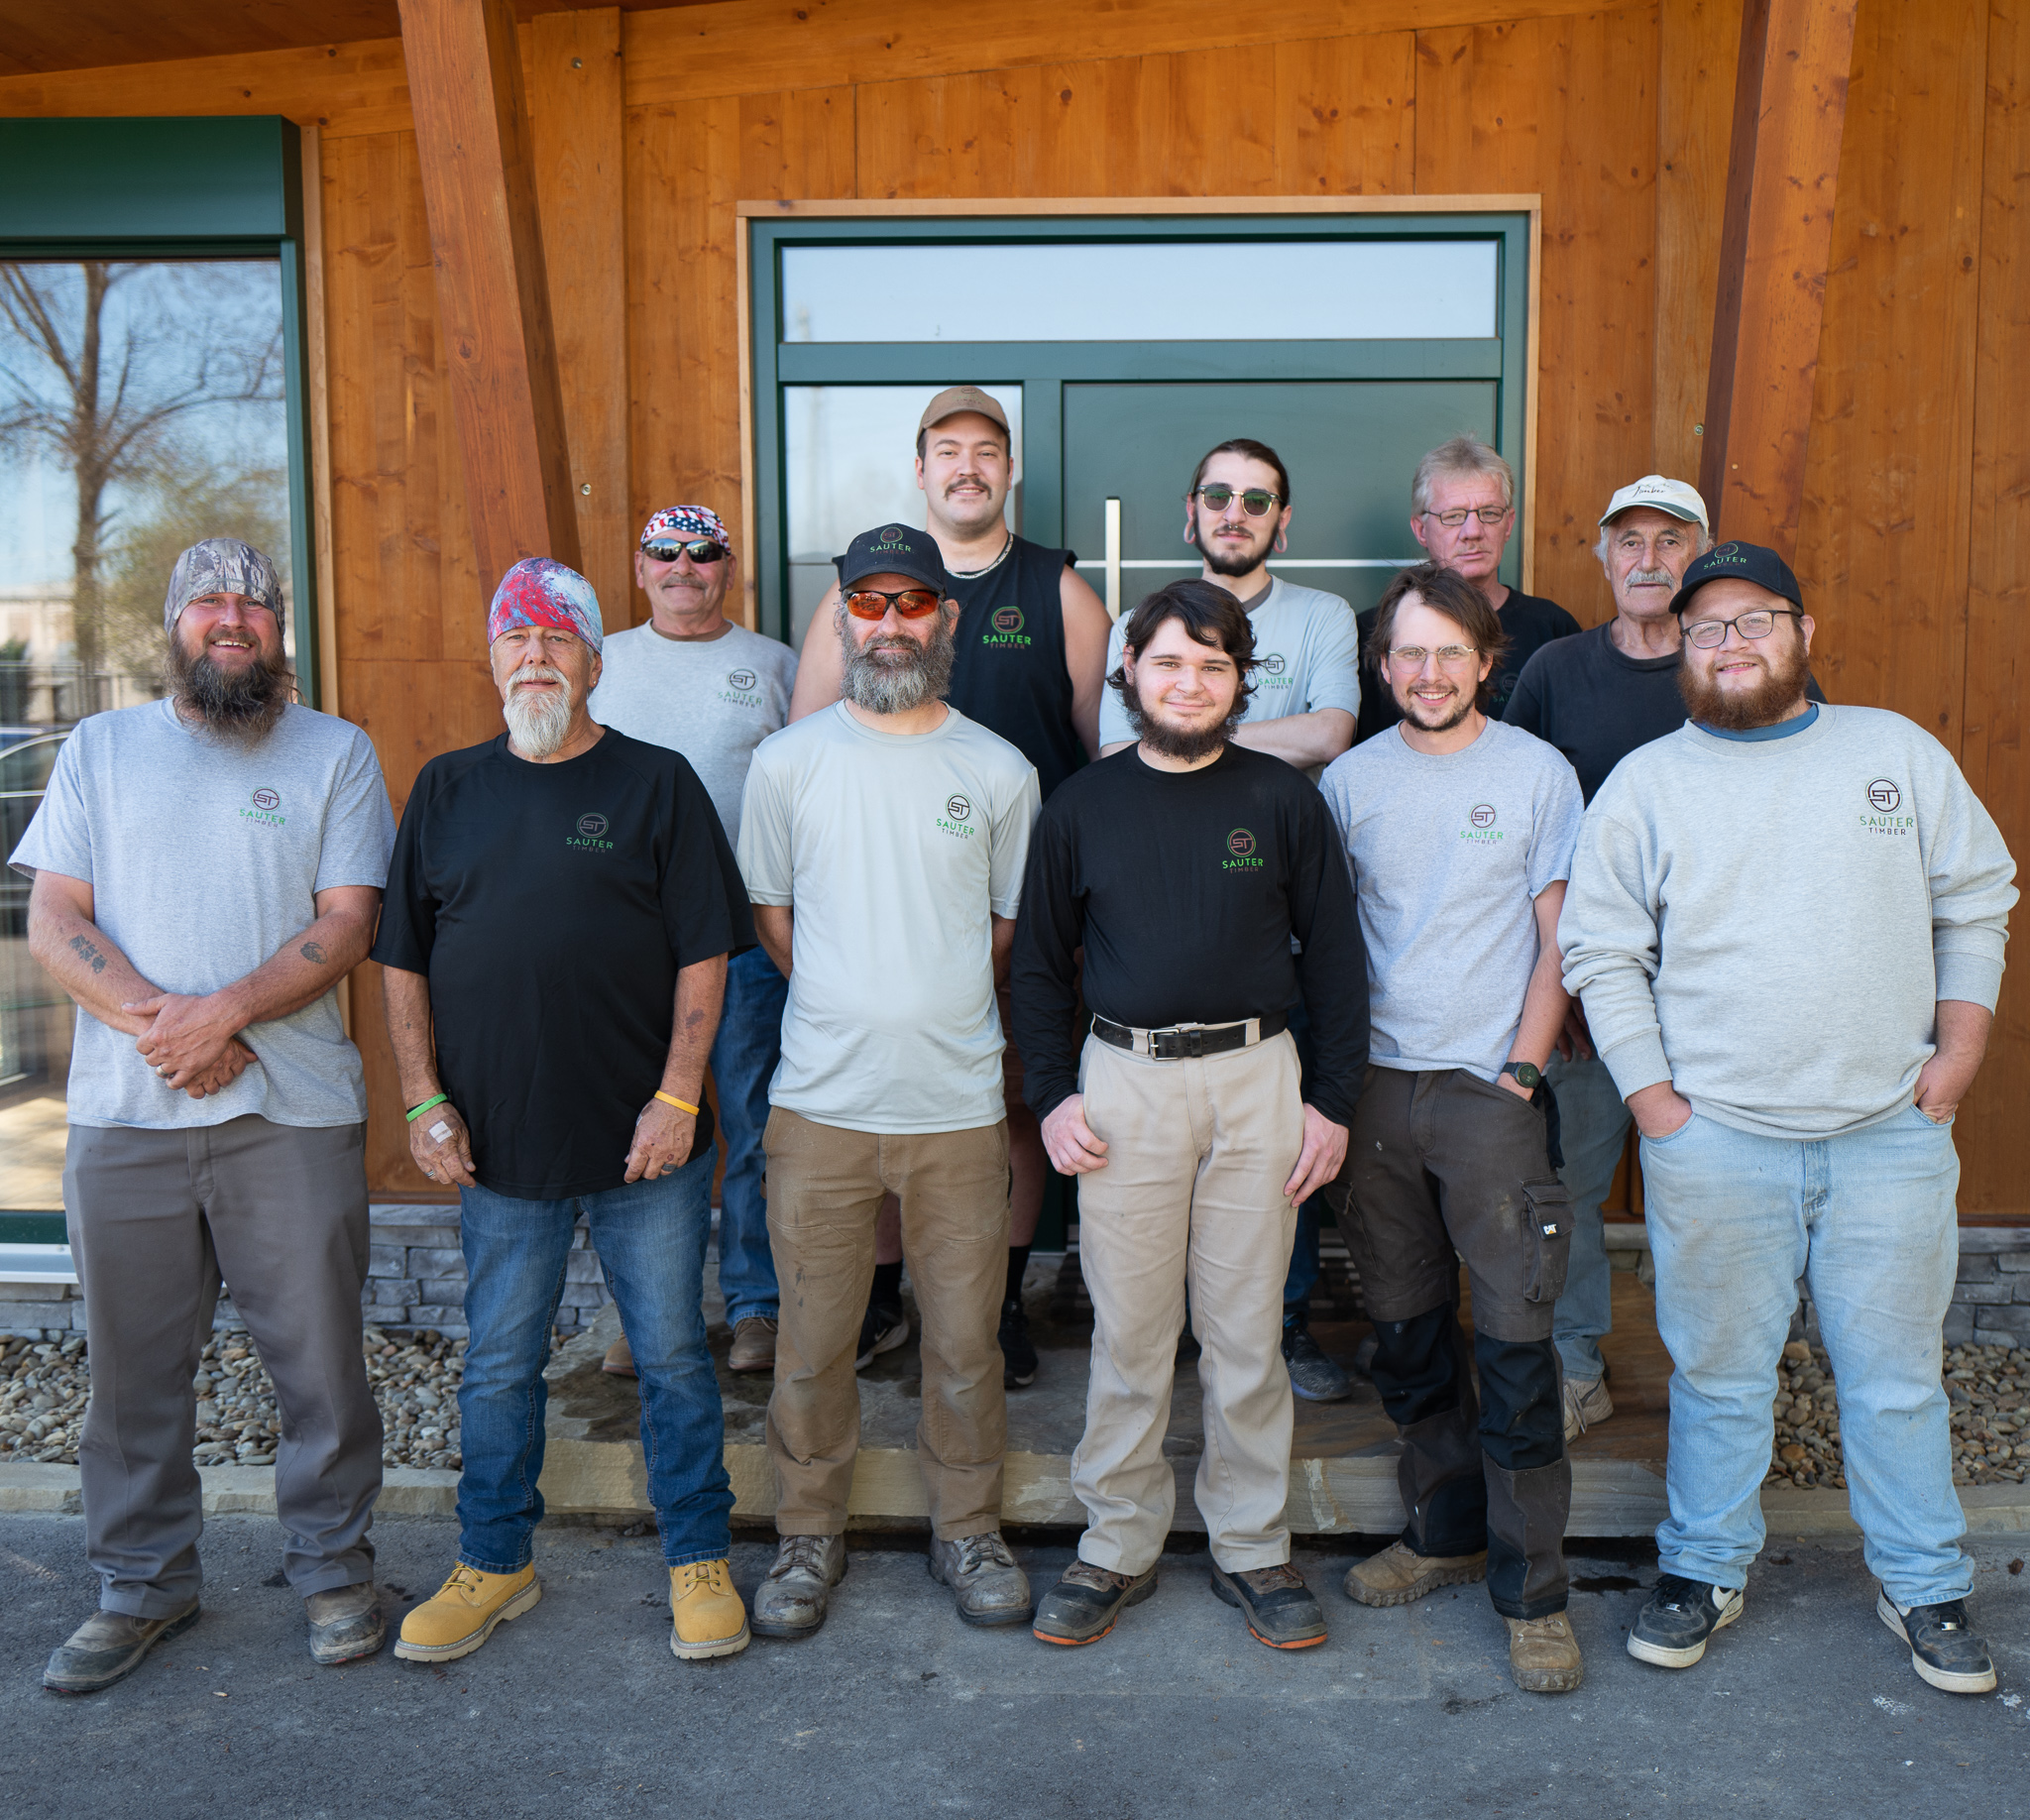 Daniel, Felix, Brent and Steve are the skilled wood finishers and draftsmen